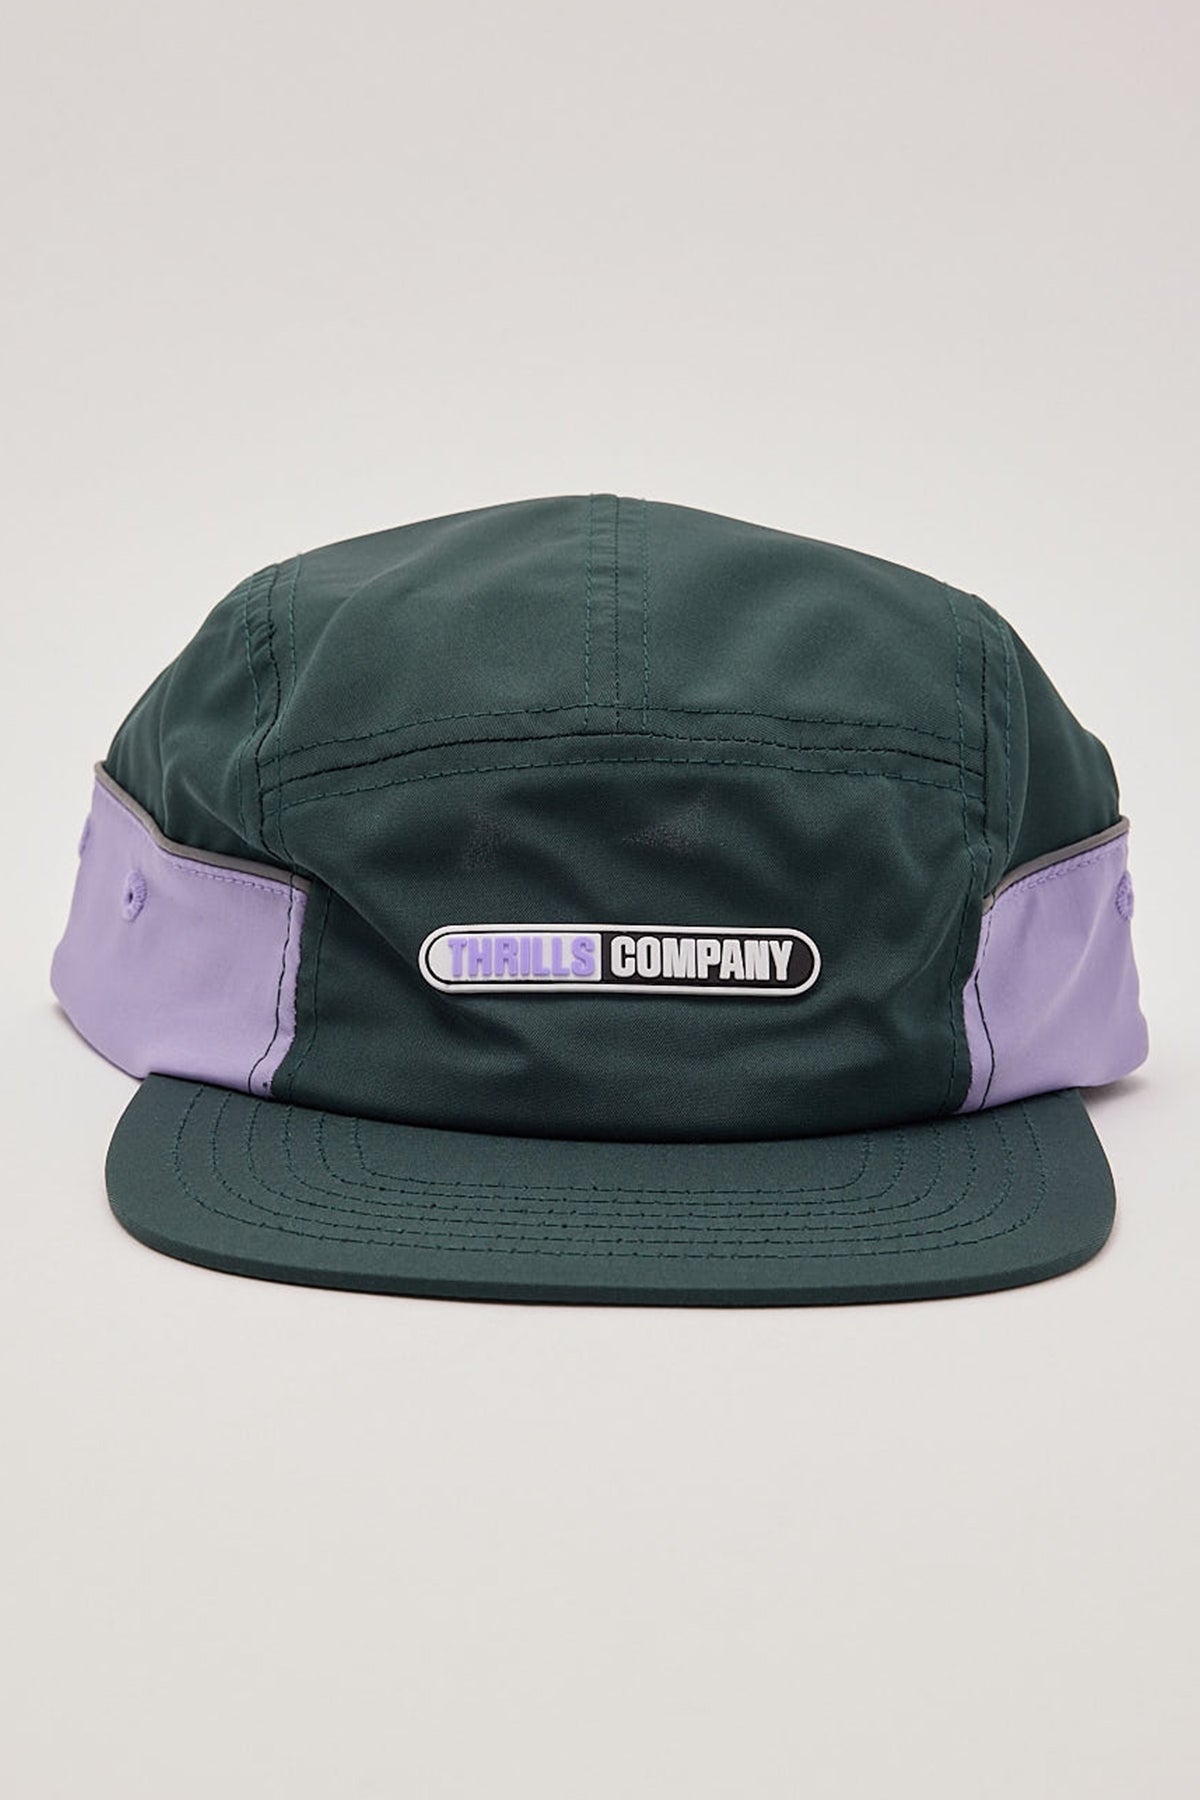 Thrills Love From Above Curved 5 Panel Cap Petrol